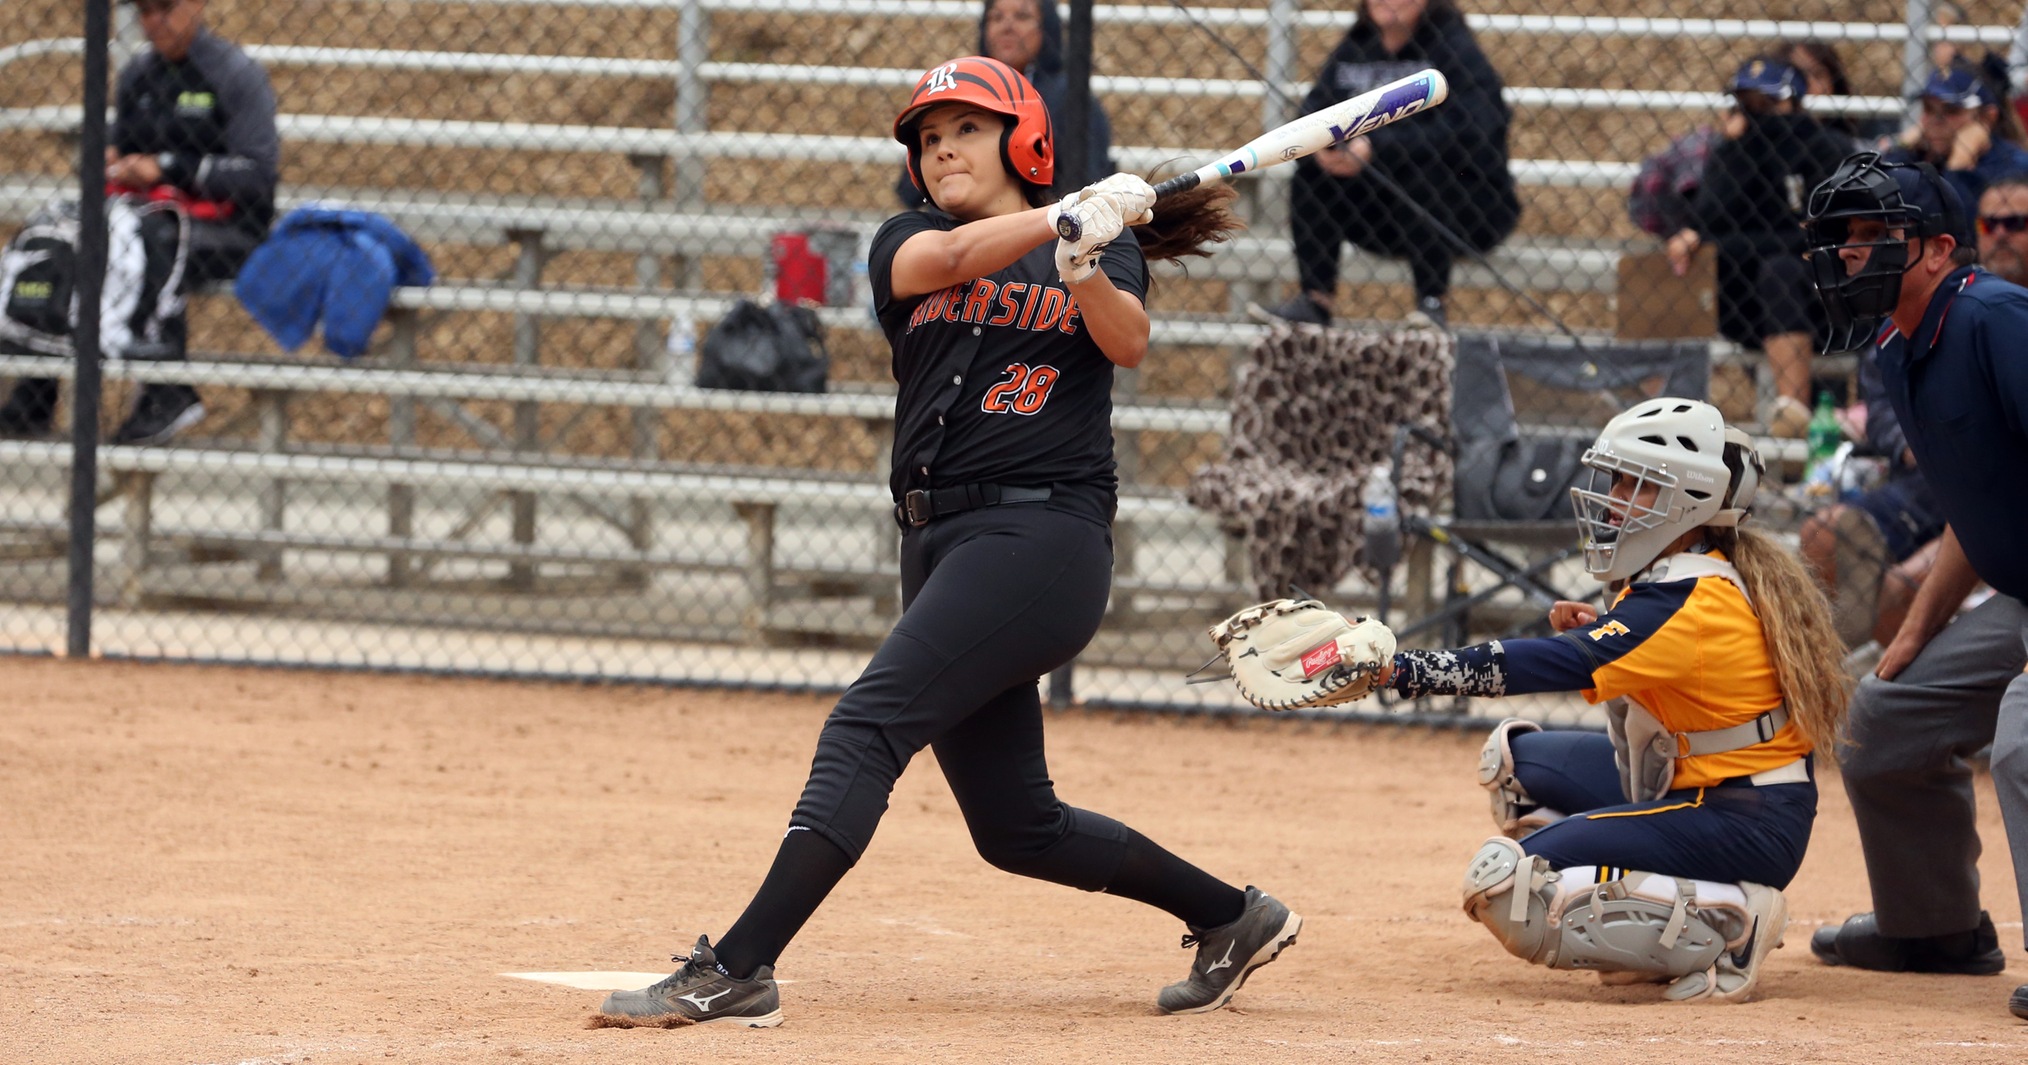 Jocelyn Ontiveros launched her fifth homerun of the season in the bottom of the sixth inning, acting as the go-ahead run. (Photo by Bobby R. Hester)